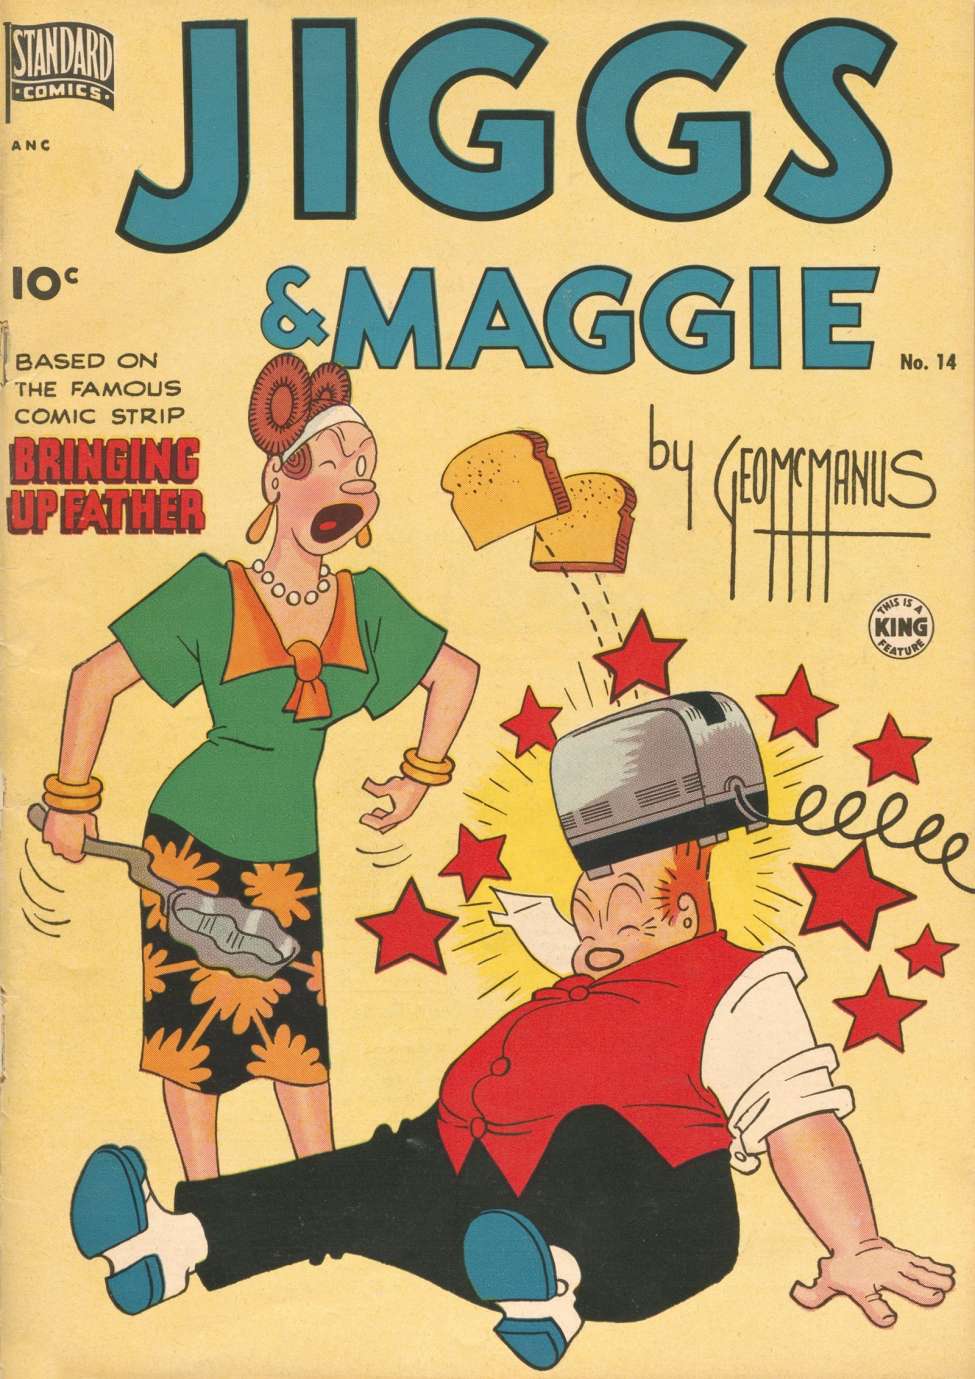 Book Cover For Jiggs & Maggie 14